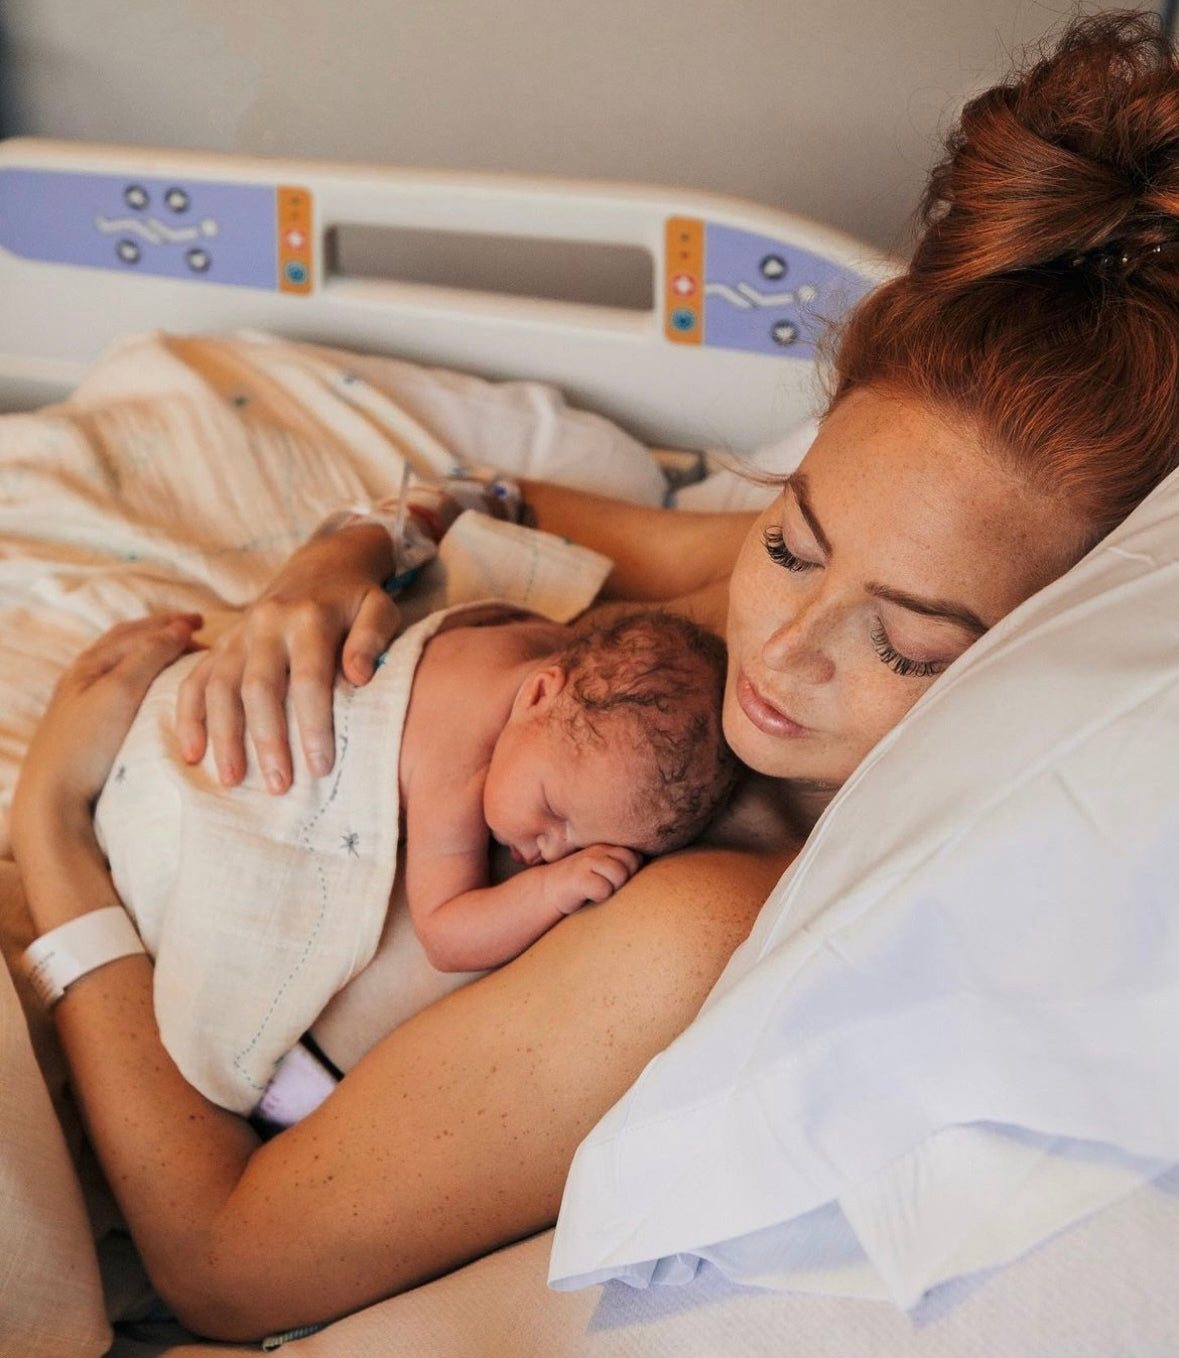 C-Section Awareness Month: One Mom's Experience